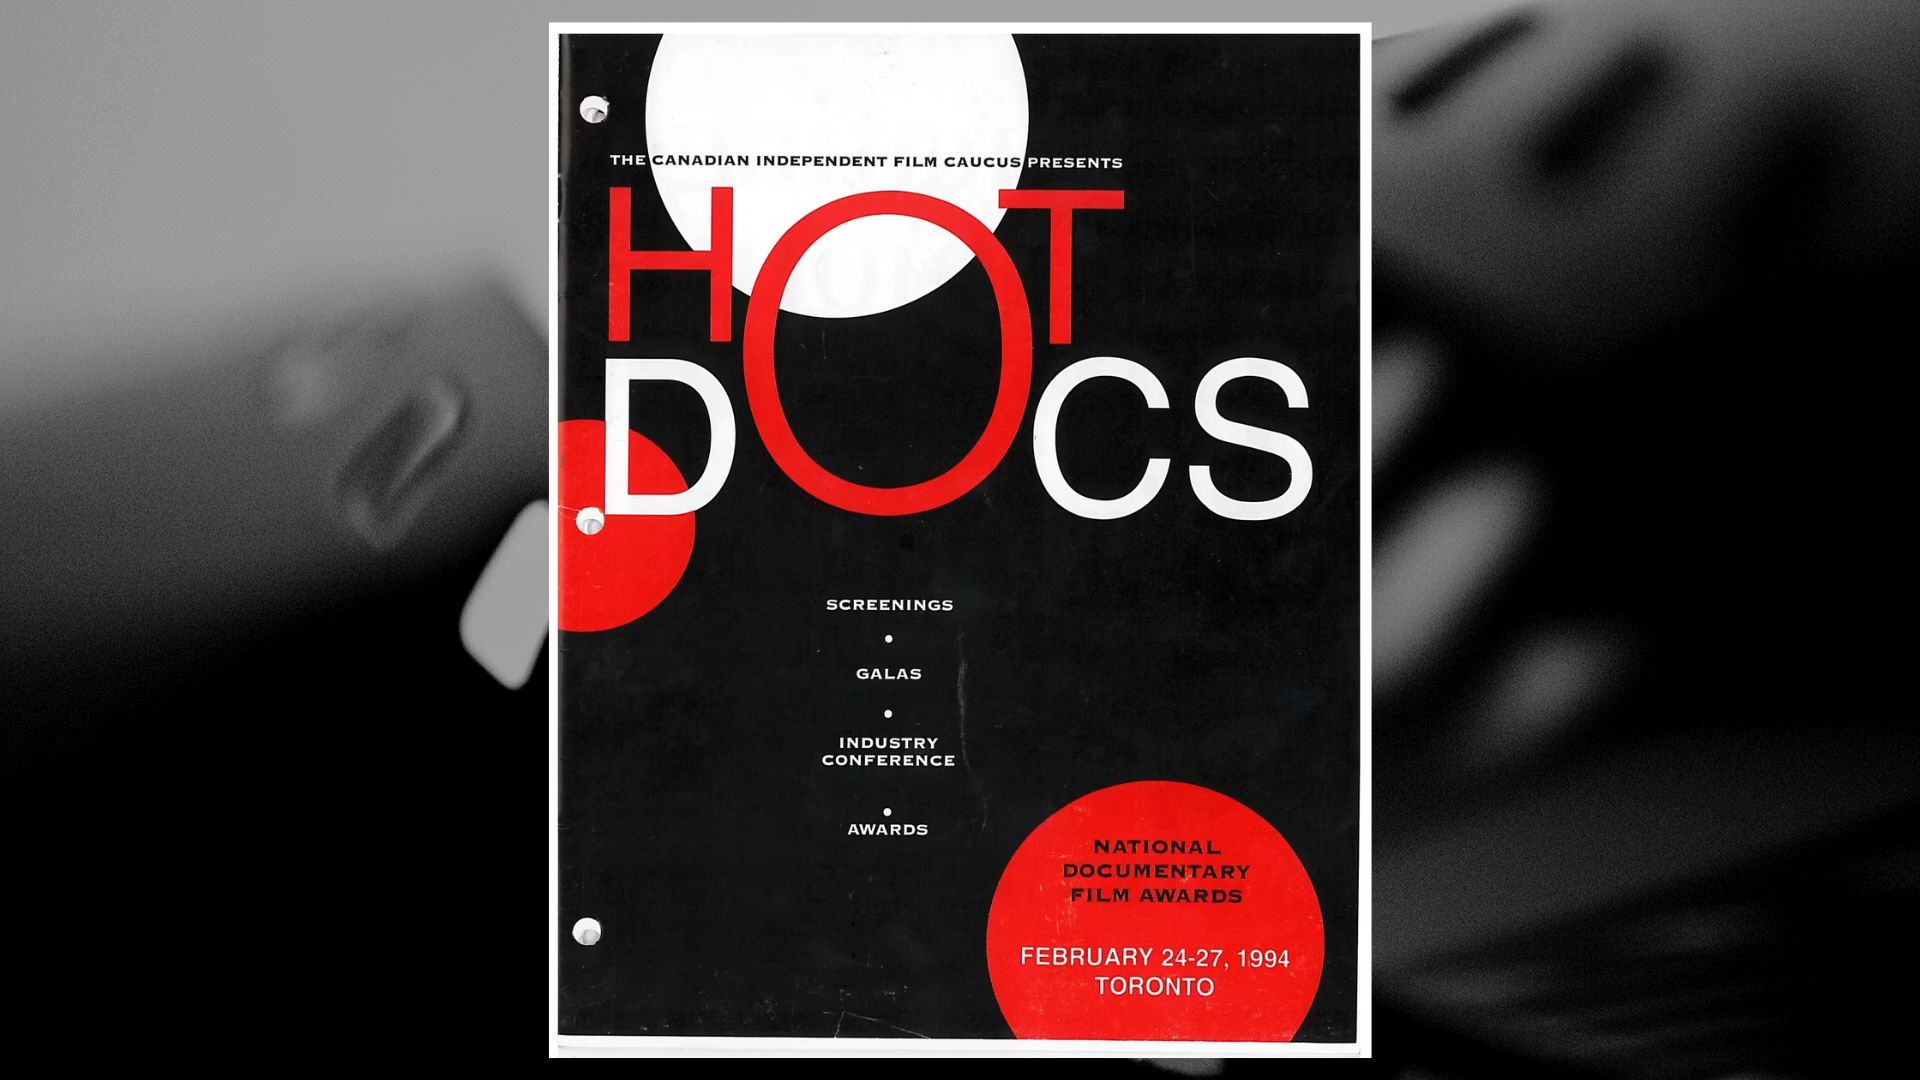 Hot Docs 1994 poster overlaying a black and white film roll image